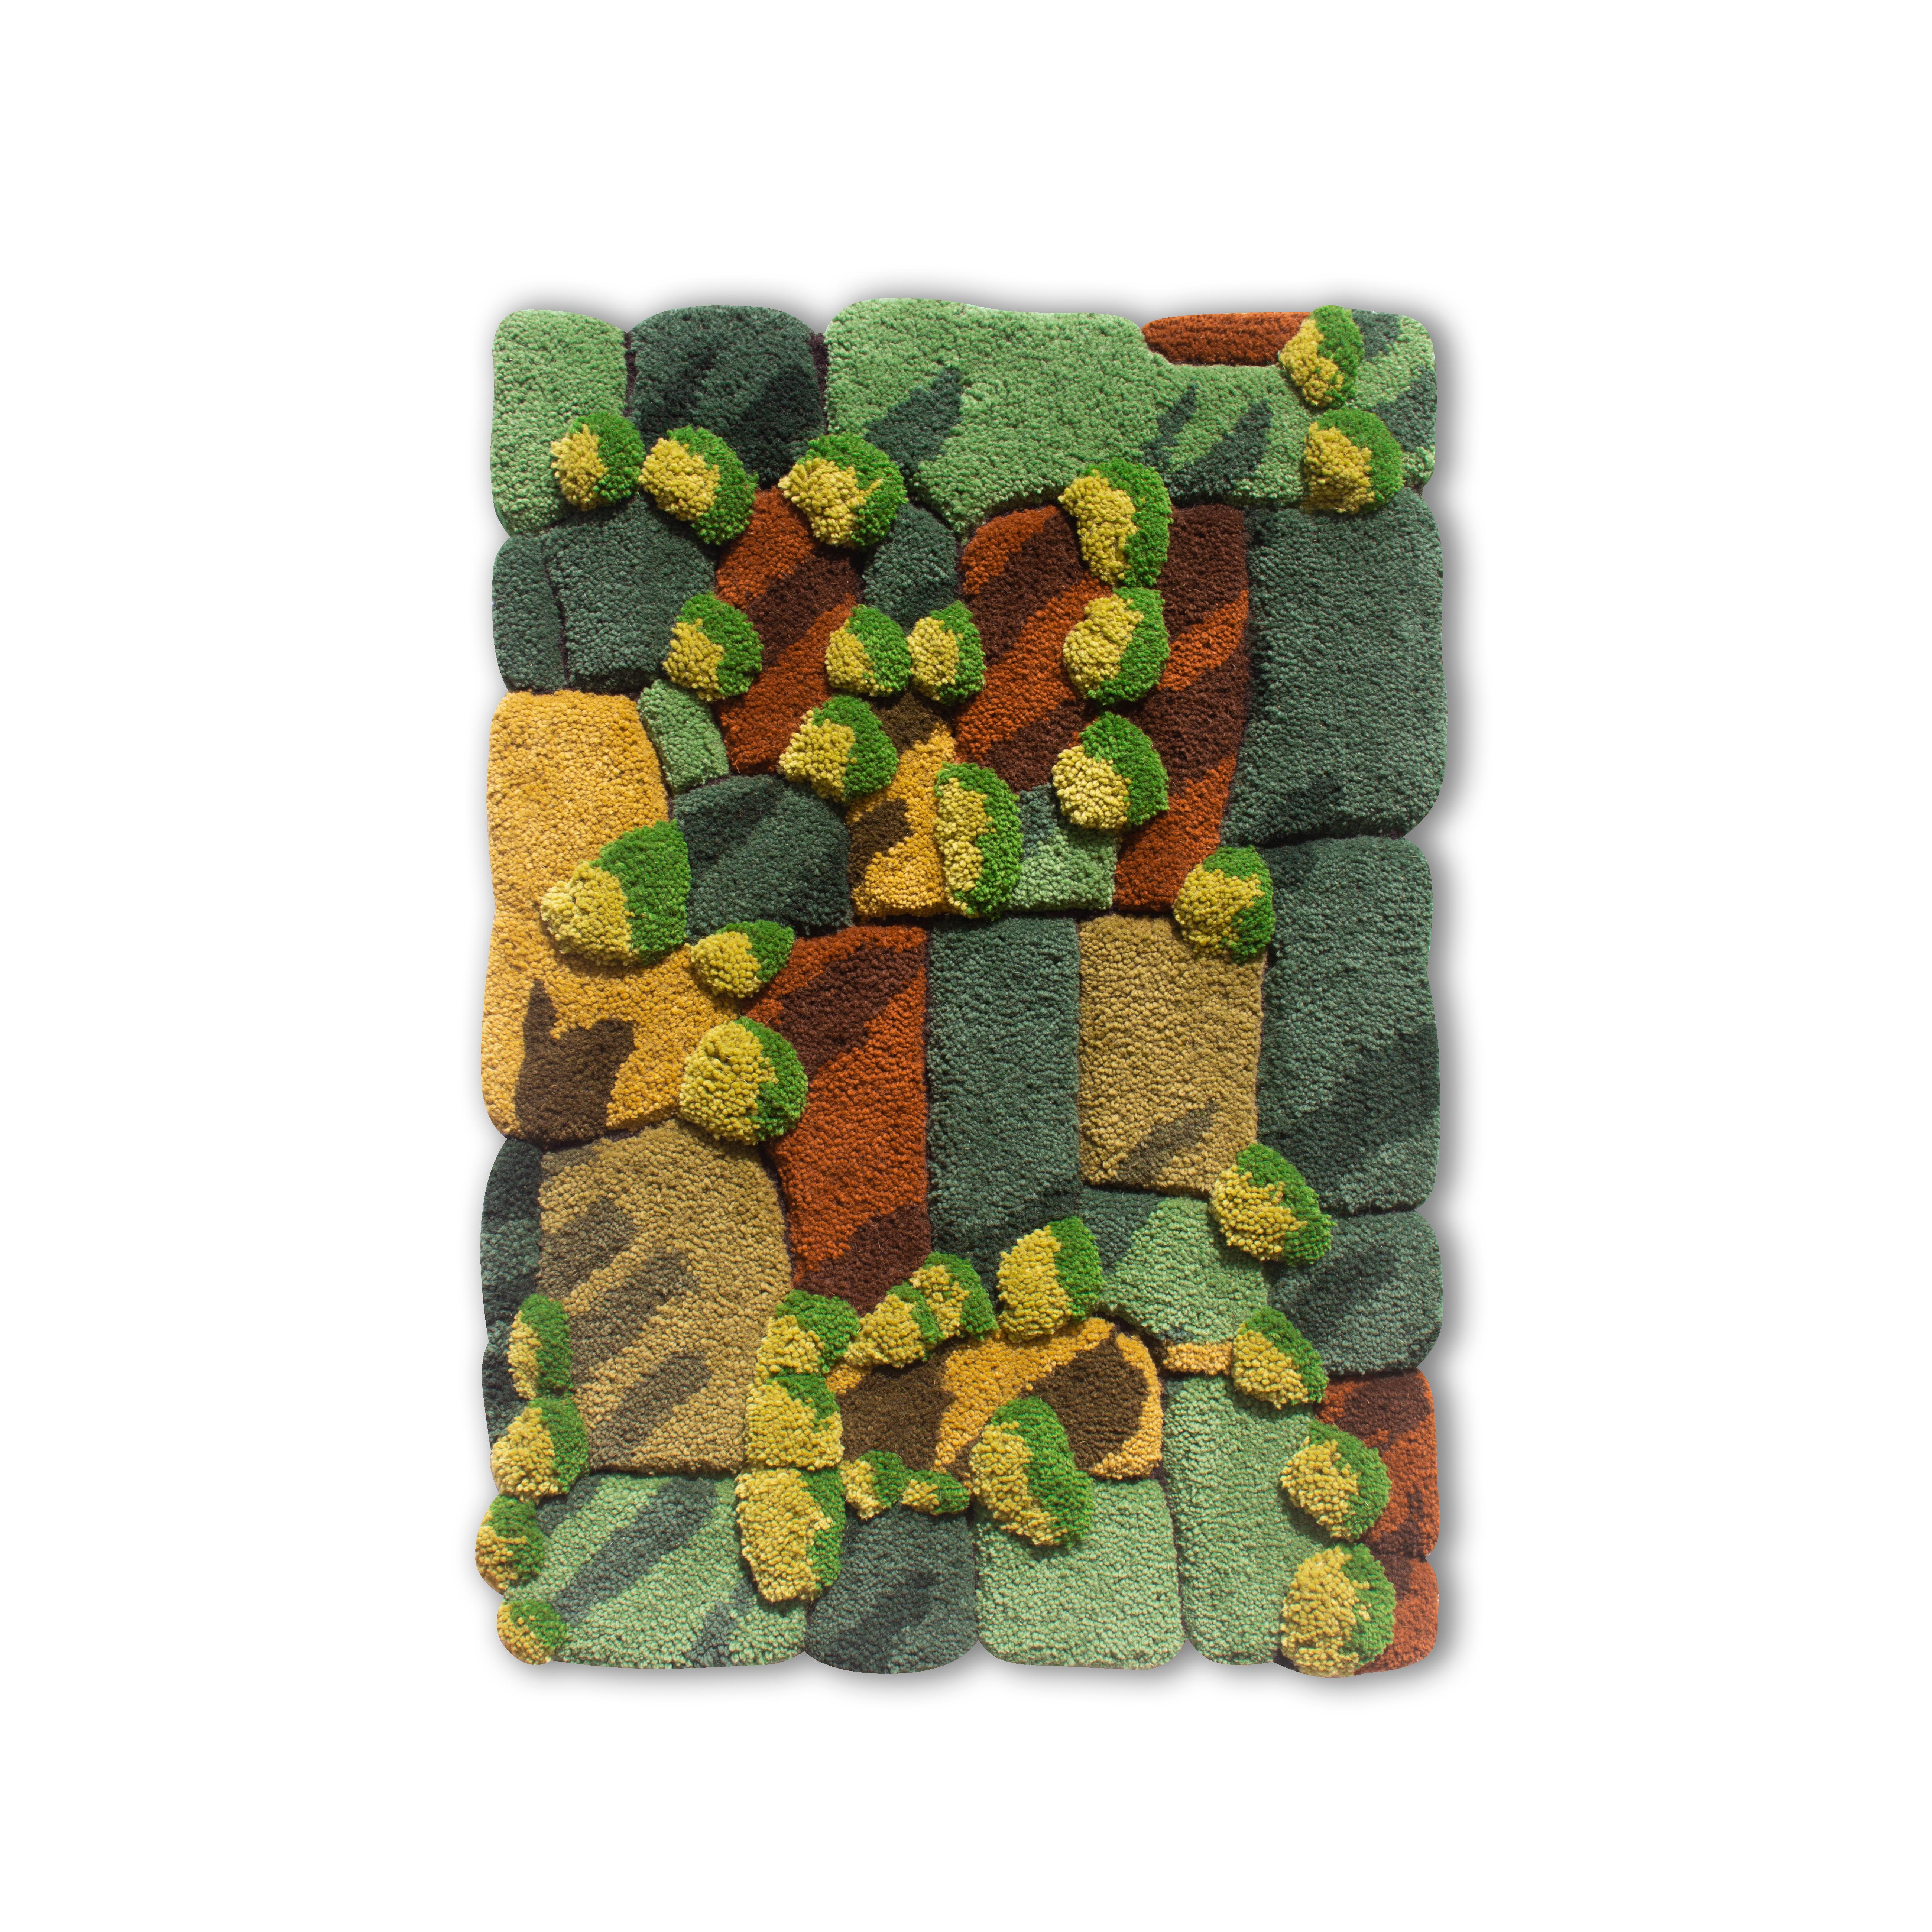 Inspired by nature, 5.7 MINUTOS LANDSCAPE Tapestry is a one of a kind artwork, representing a typical portuguese rural landscape from above at twilight hour. Handmade using tufting technique and 100% Portuguese wool yarn with anti-moth treatment.